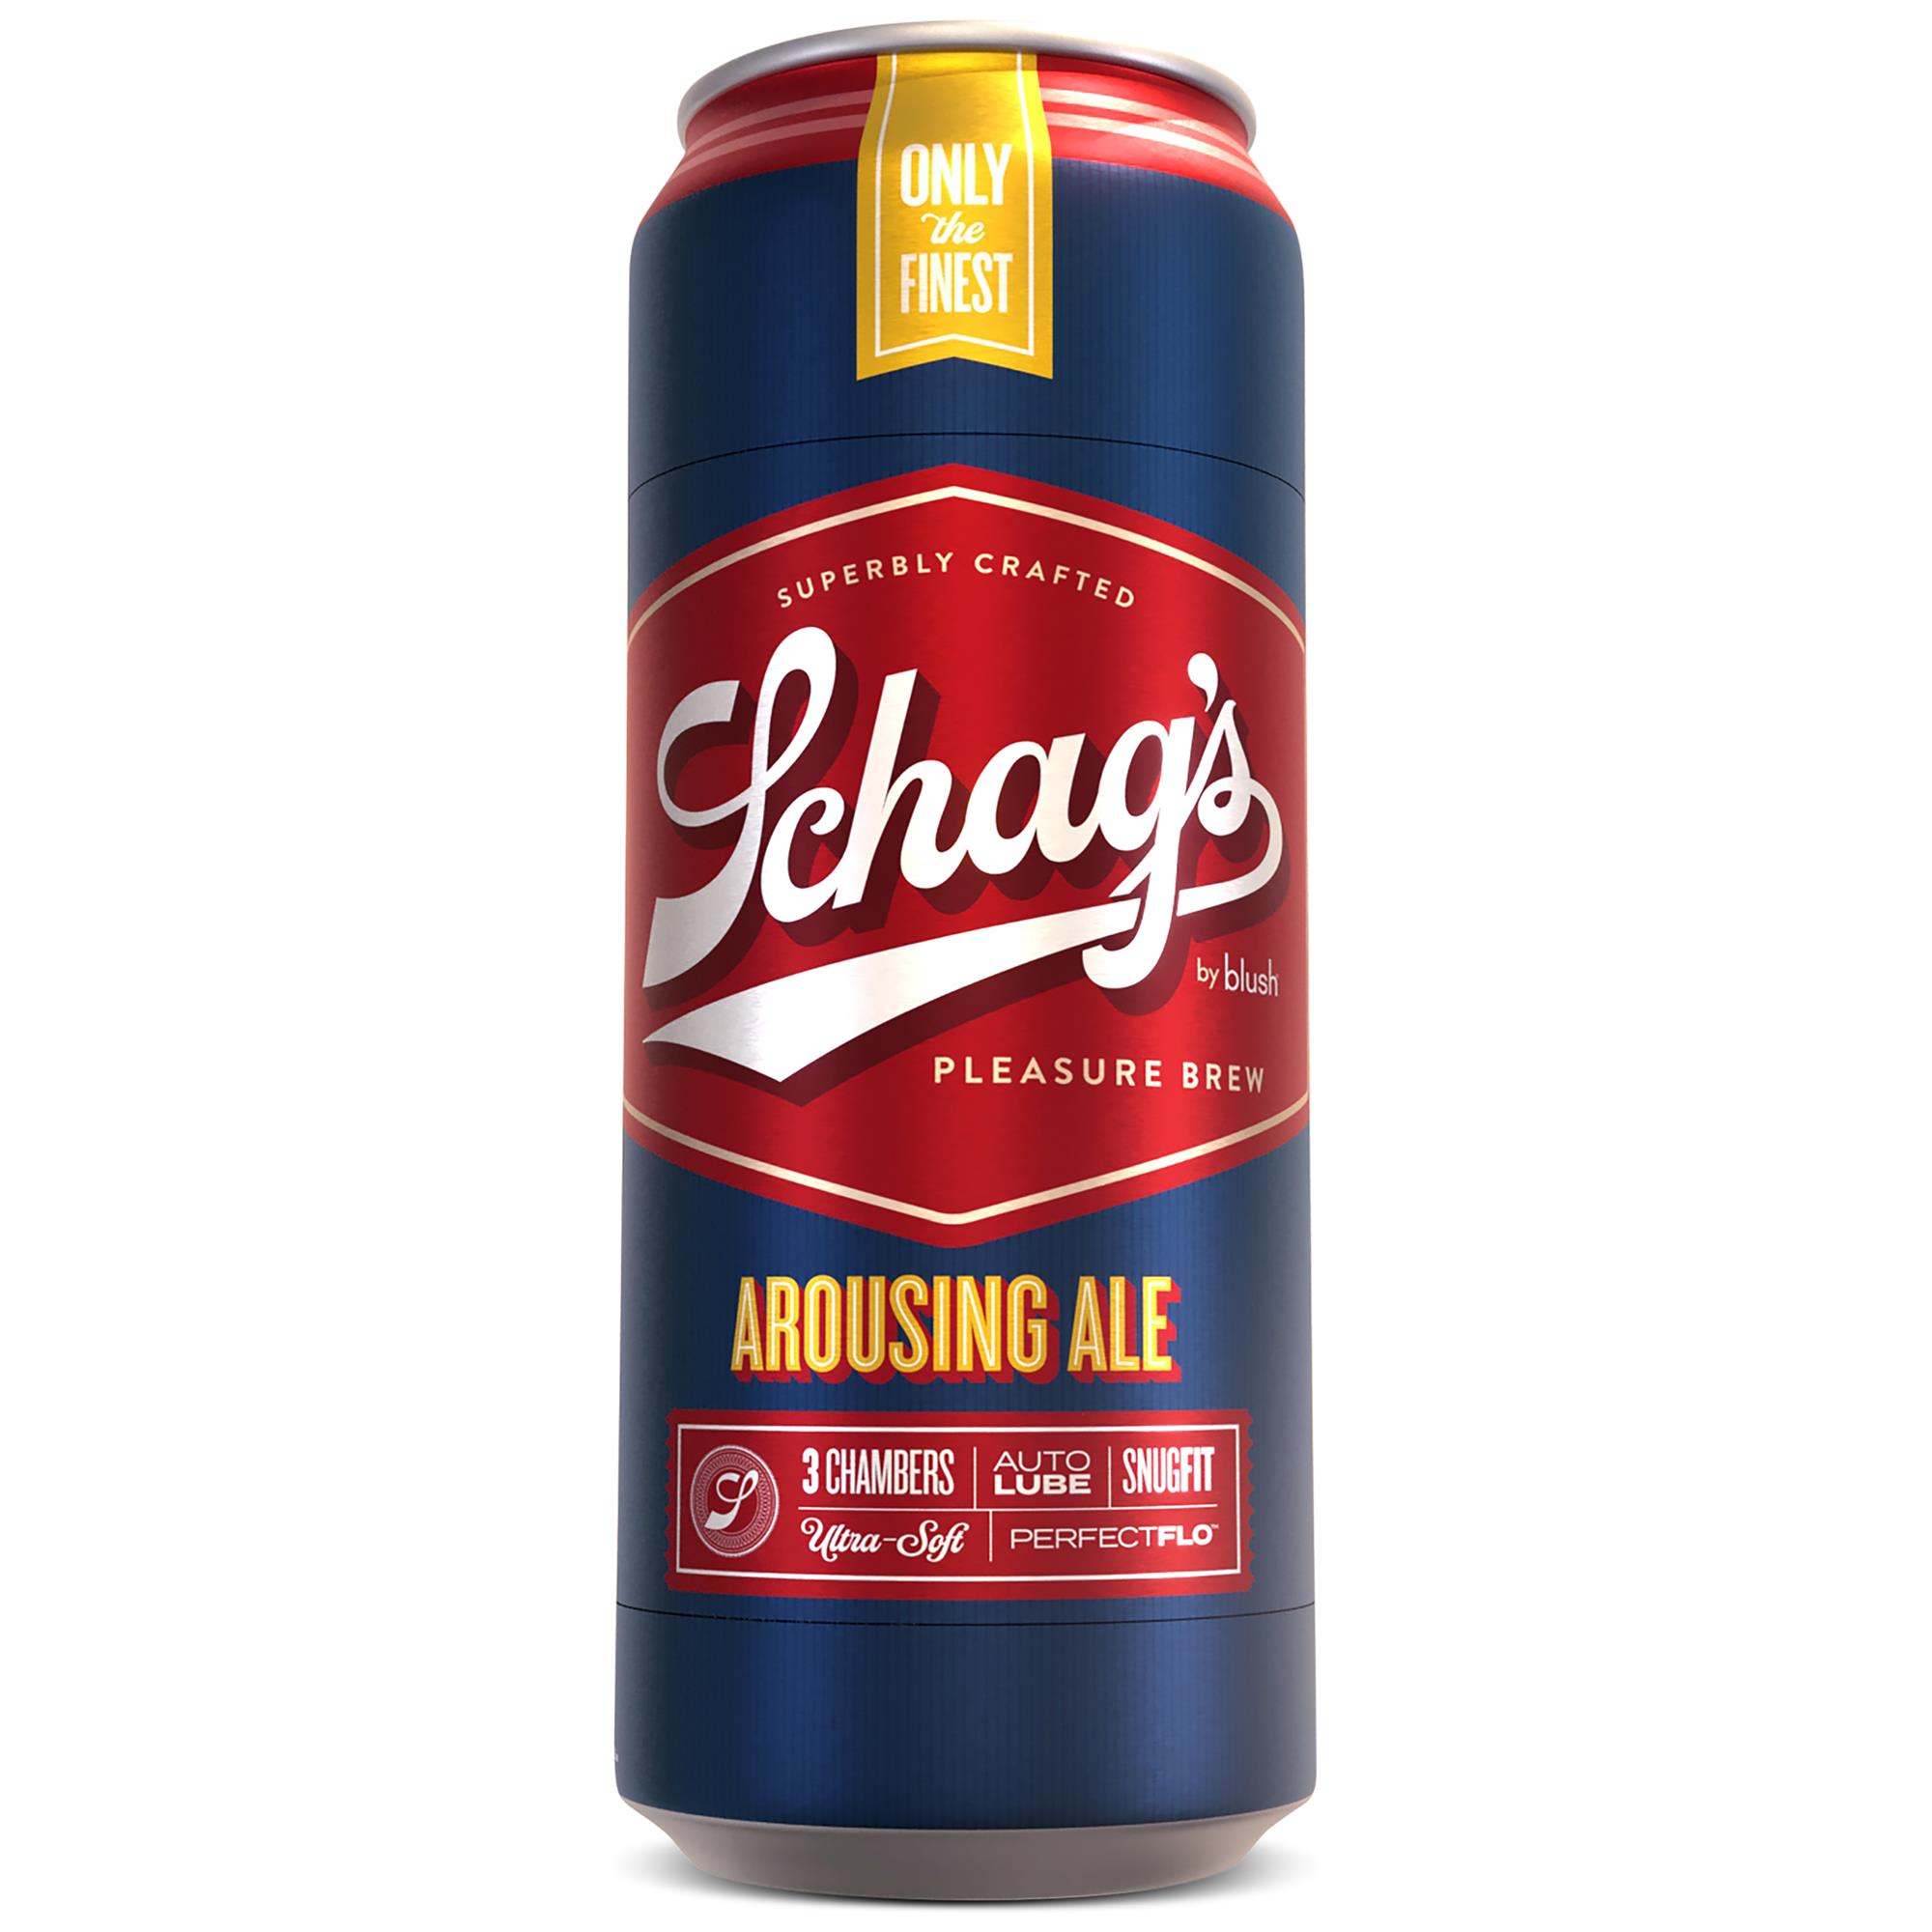 Schags Arousing Ale Frosted | Lösvagina | Intimast